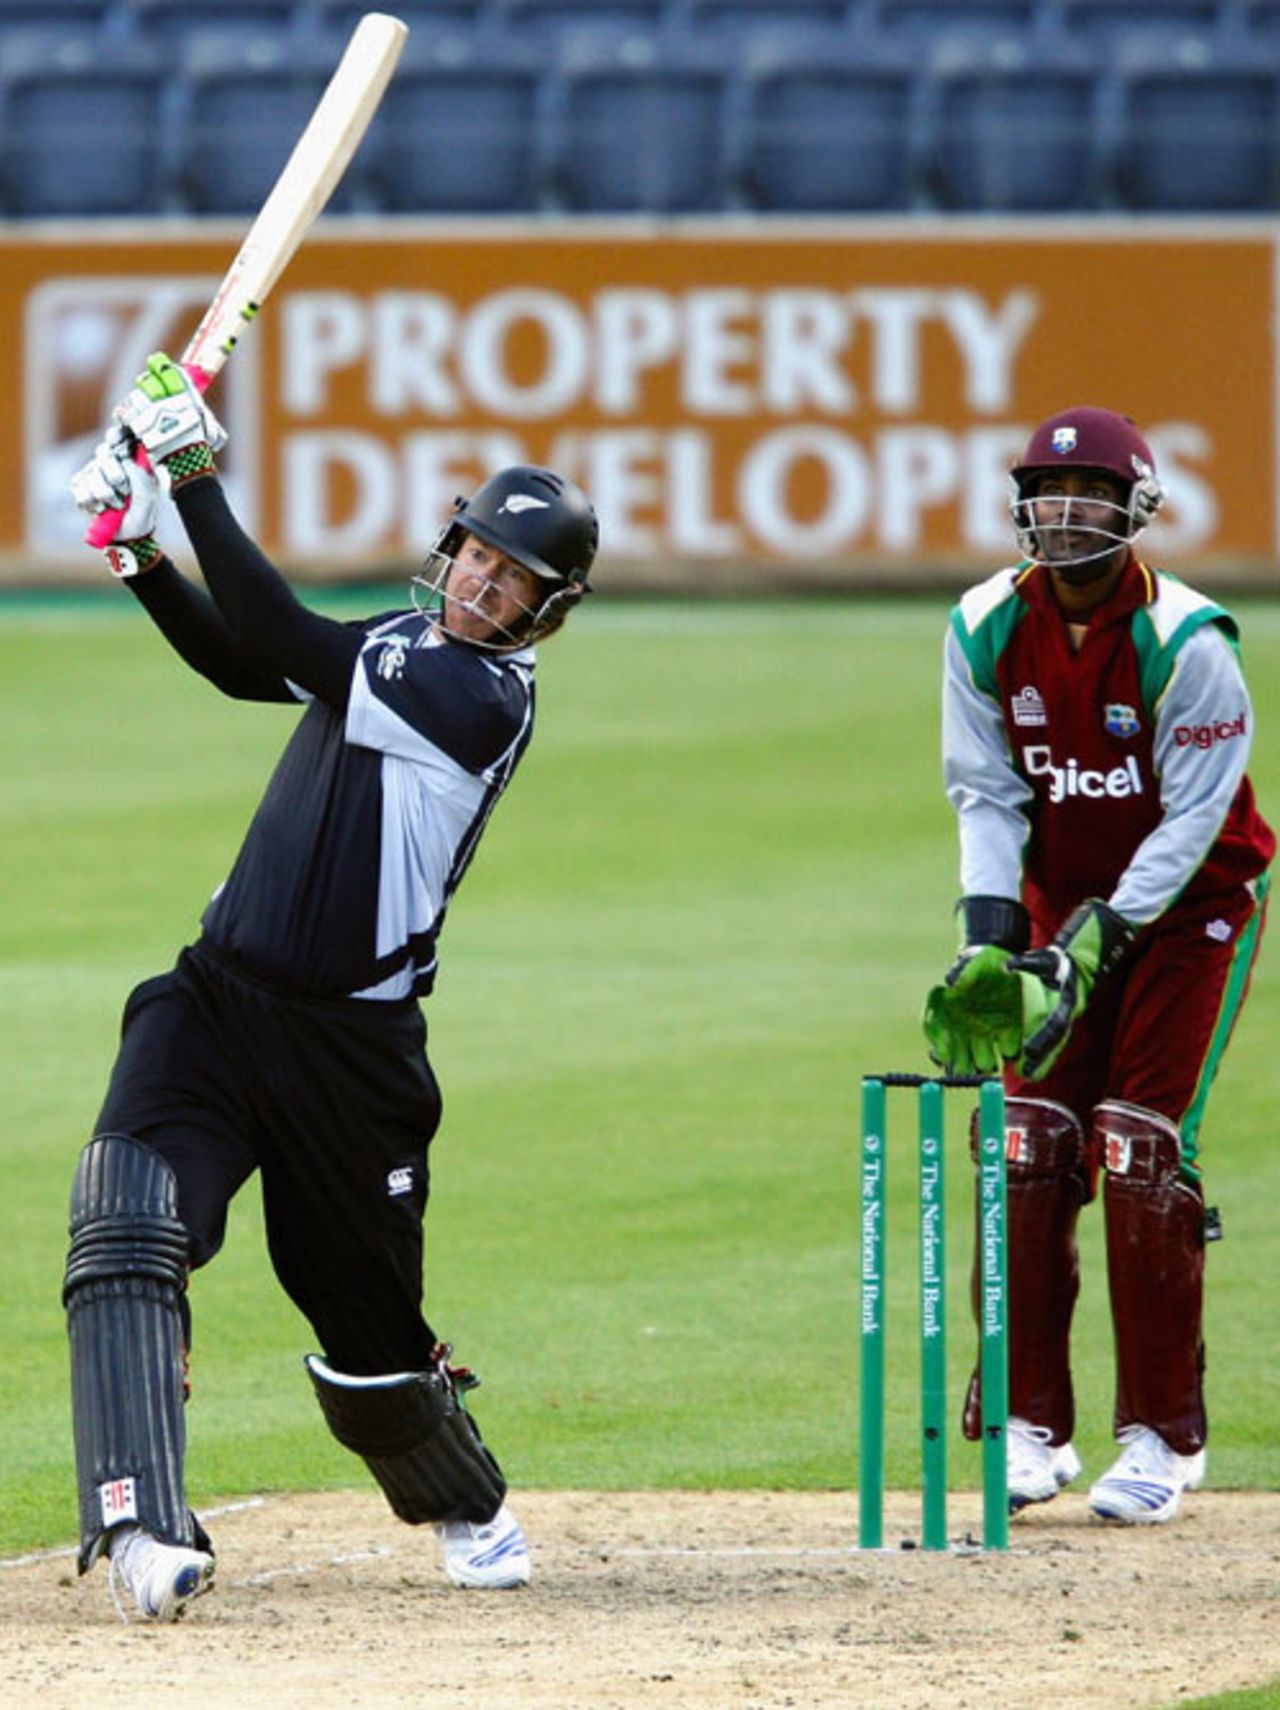 Jacob Oram drills one back down the ground, New Zealand v West Indies, 2nd ODI, Christchurch, January 3, 2009